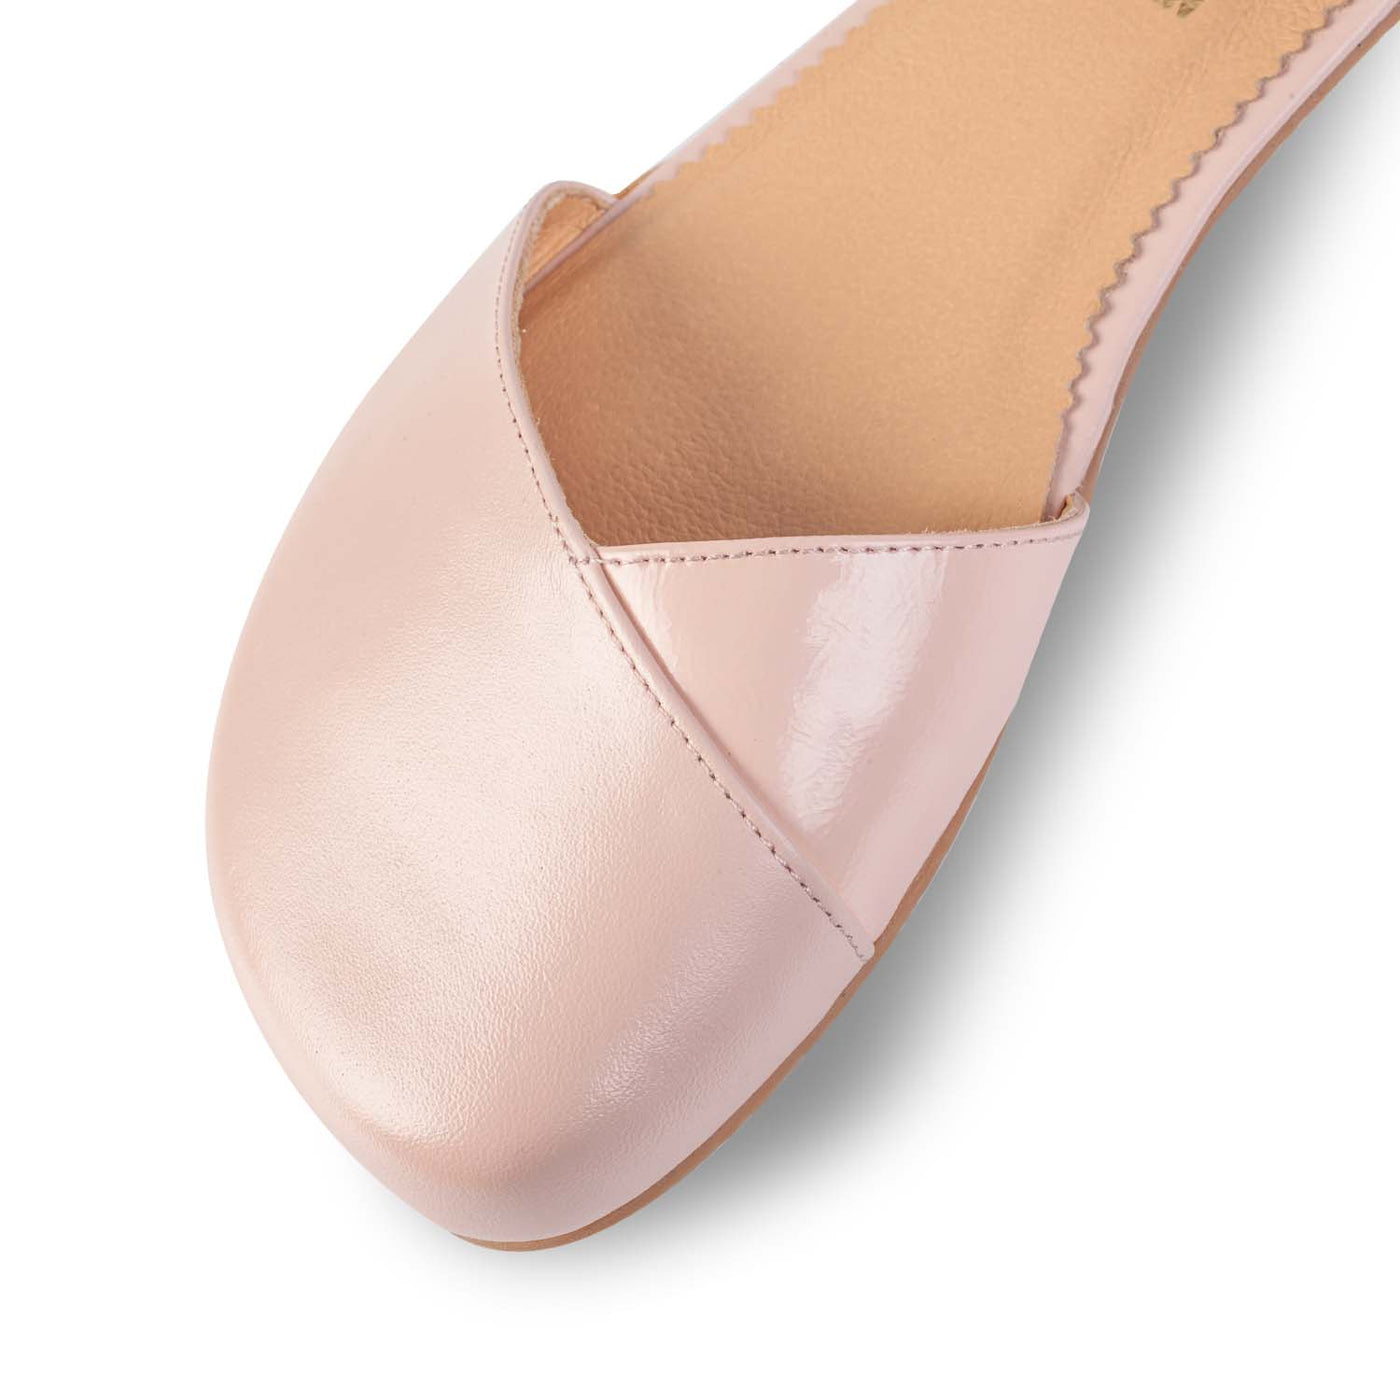 A photo of Shapen Poppy D’orsay dressy flats with a leather upper and rubber soles. The flats are a rose beige color with a heel cup and dainty ankle strap, the inside of the sole are a beige color. The right shoe is shown up close from the front against a white background. #color_rose